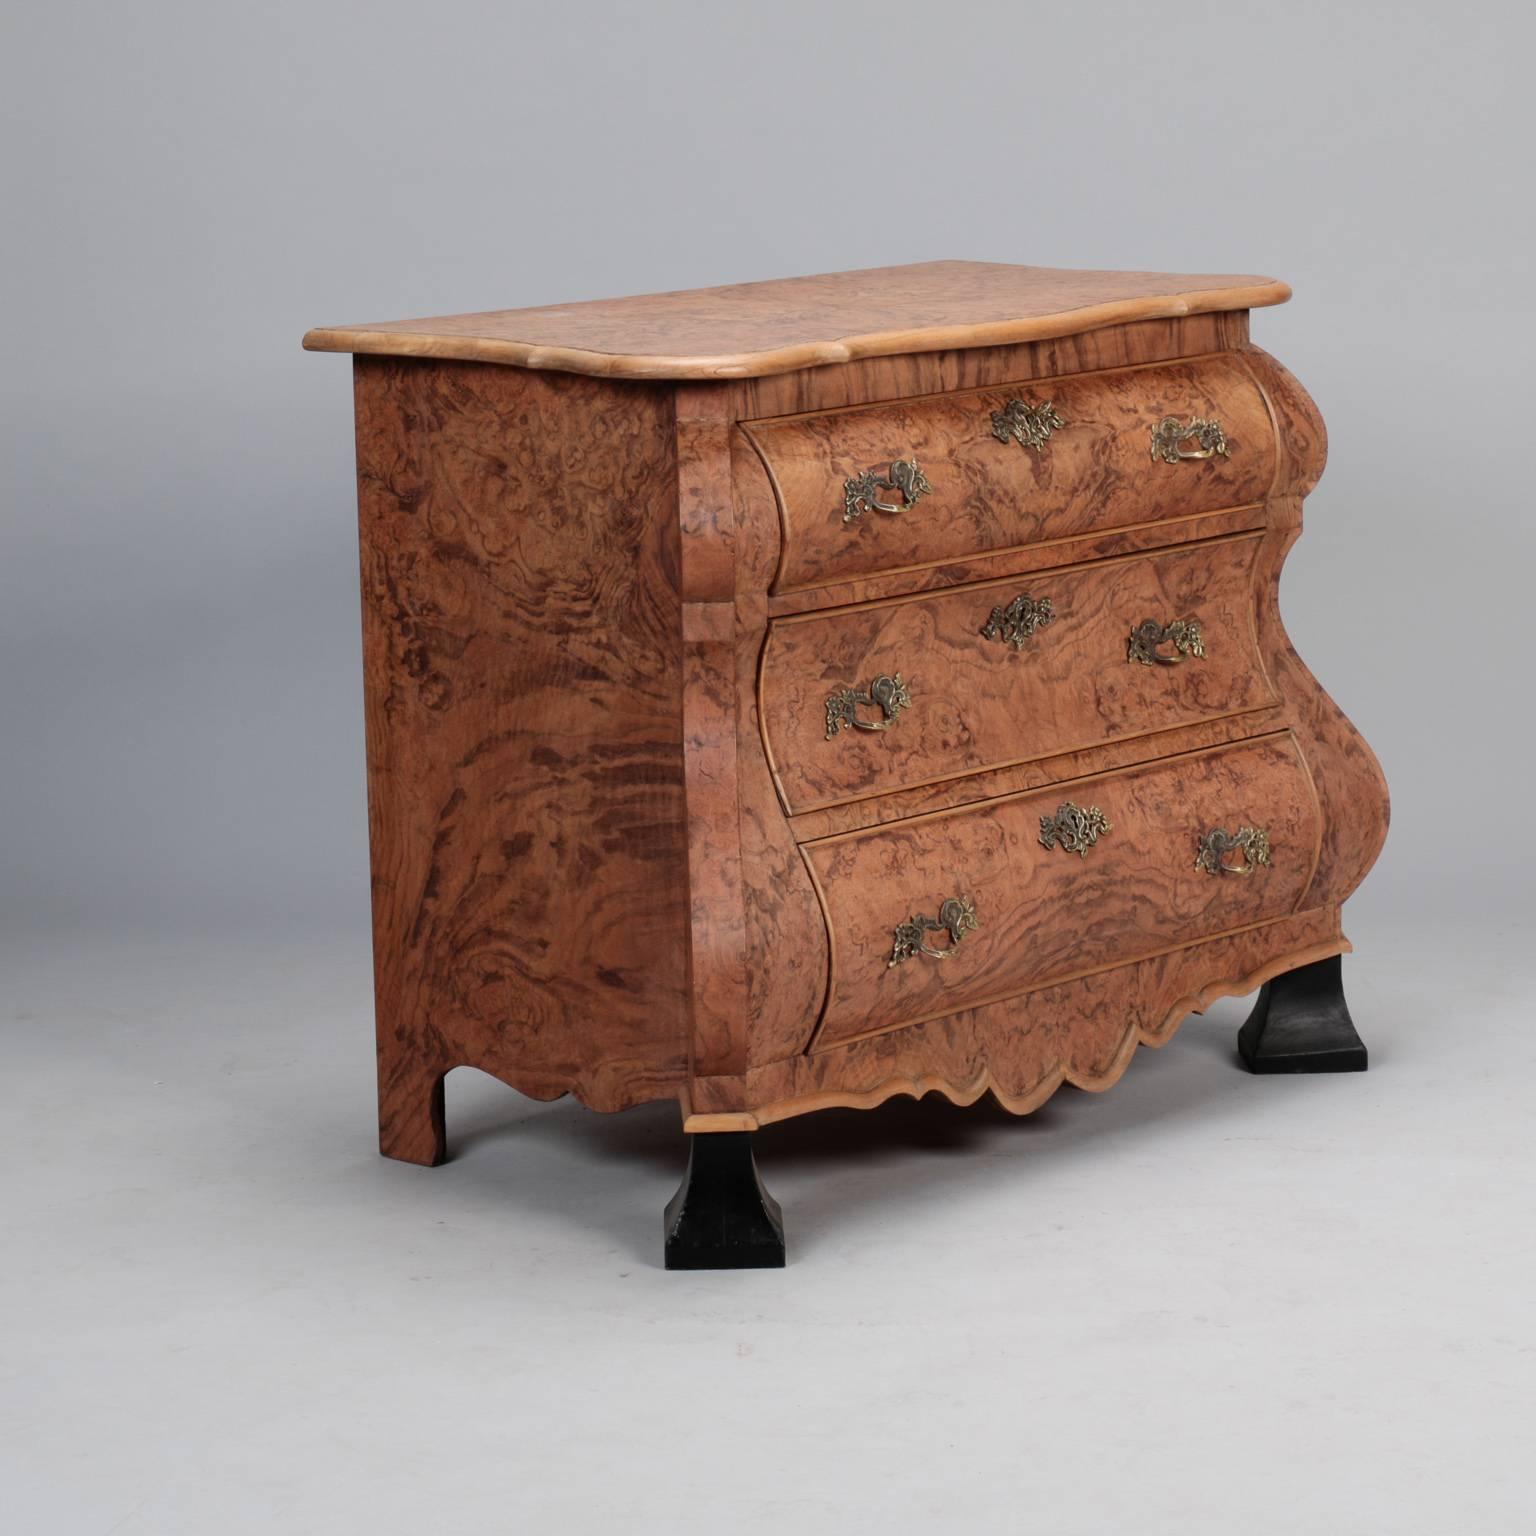 Circa 1920s bombe chest has burr walnut exterior, three locking drawers, antique brass hardware, wide ebonised feet and a curvy apron. 

